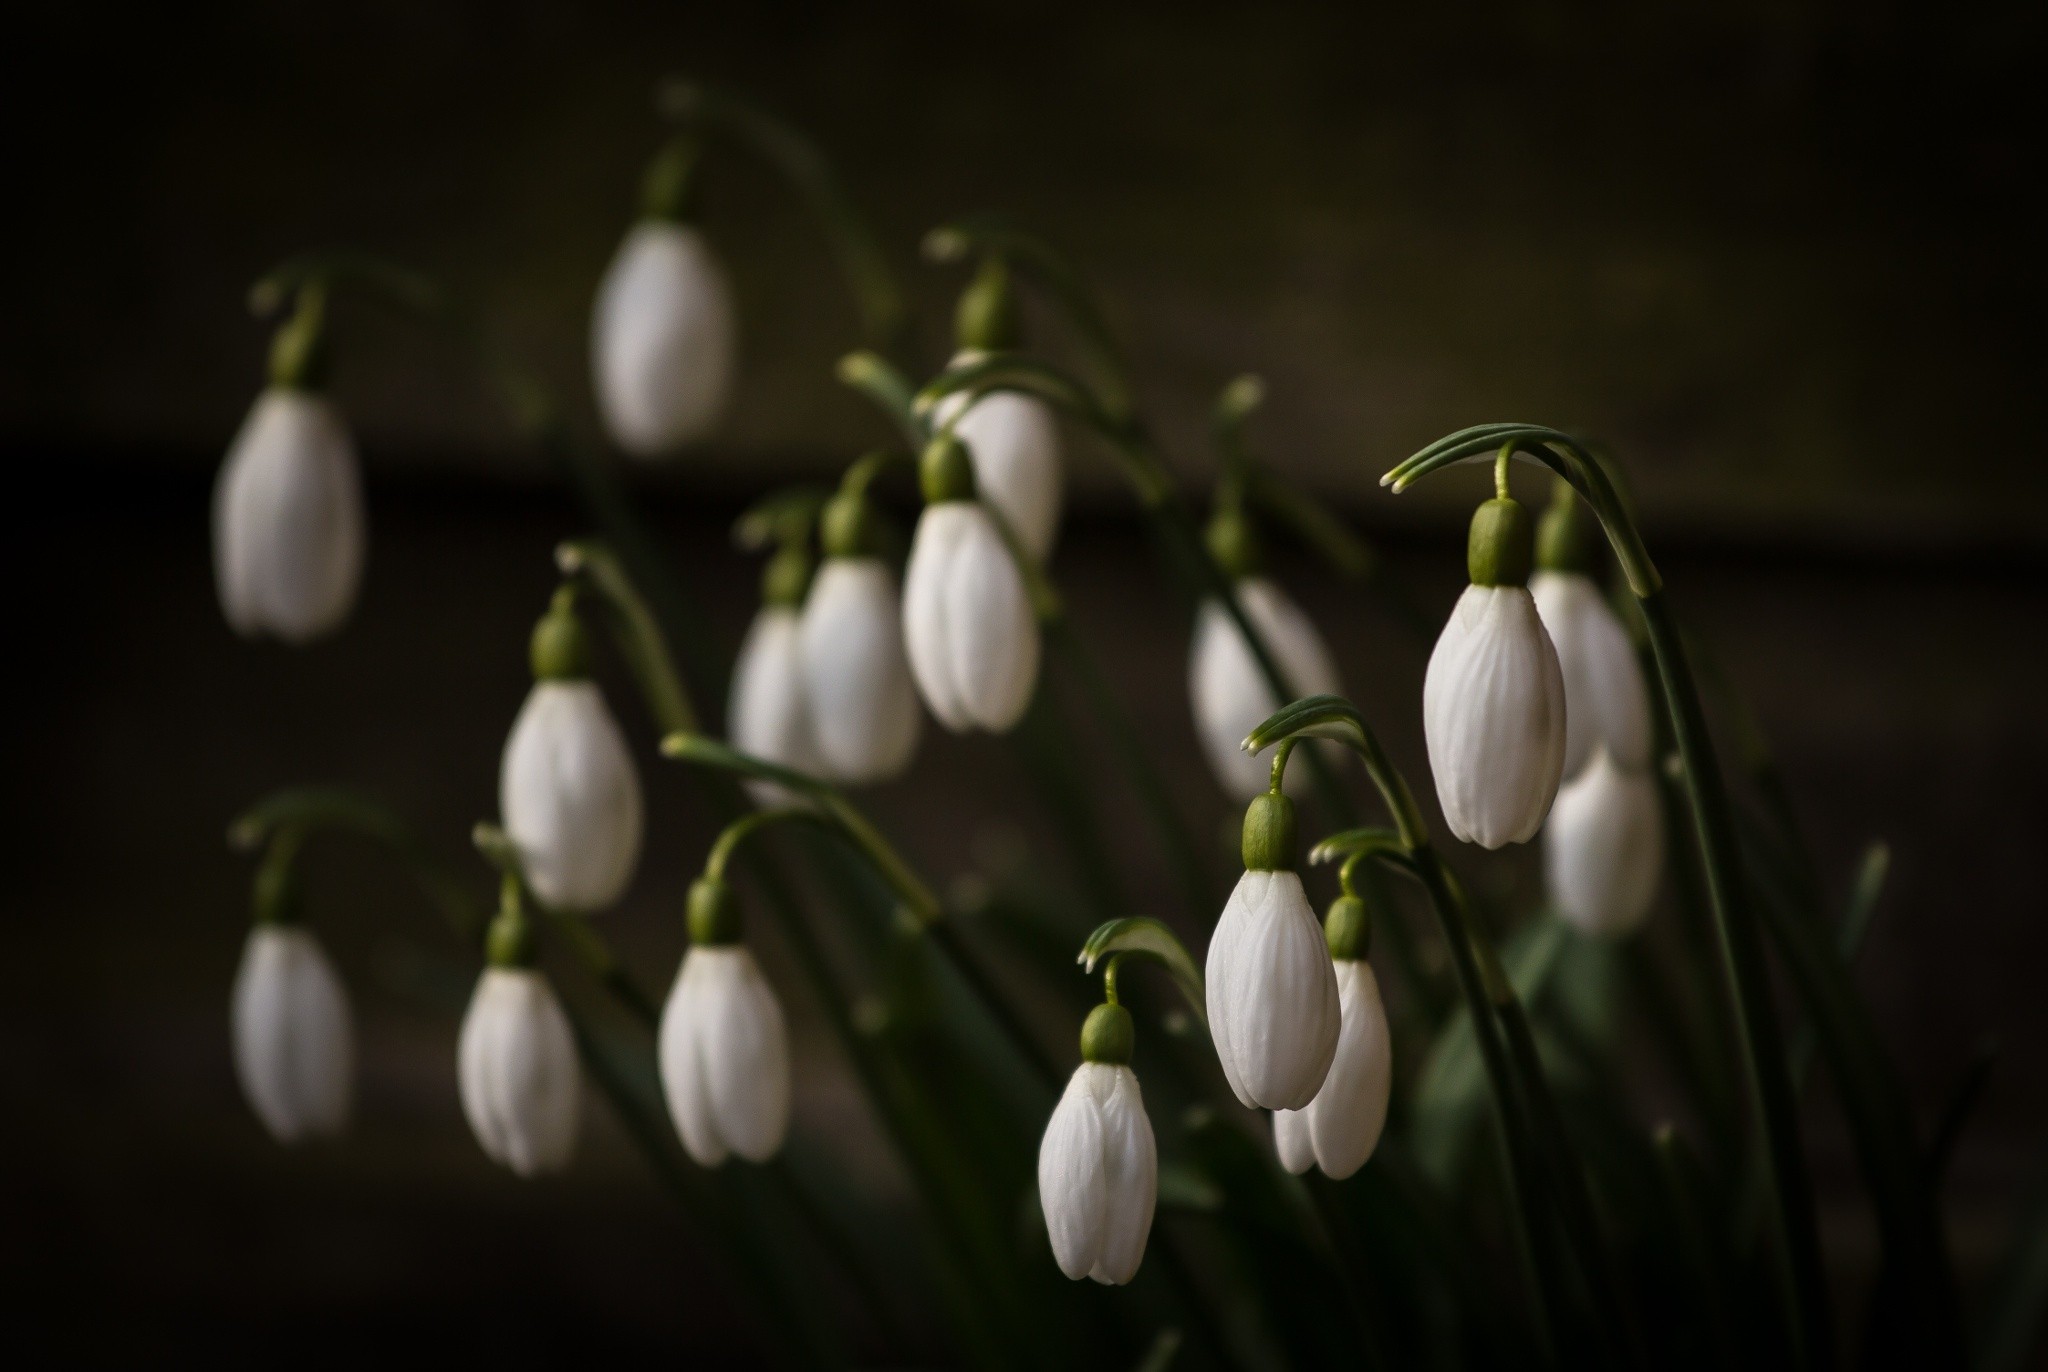 General 2048x1372 photography macro white flowers plants wood depth of field flowers snowdrops